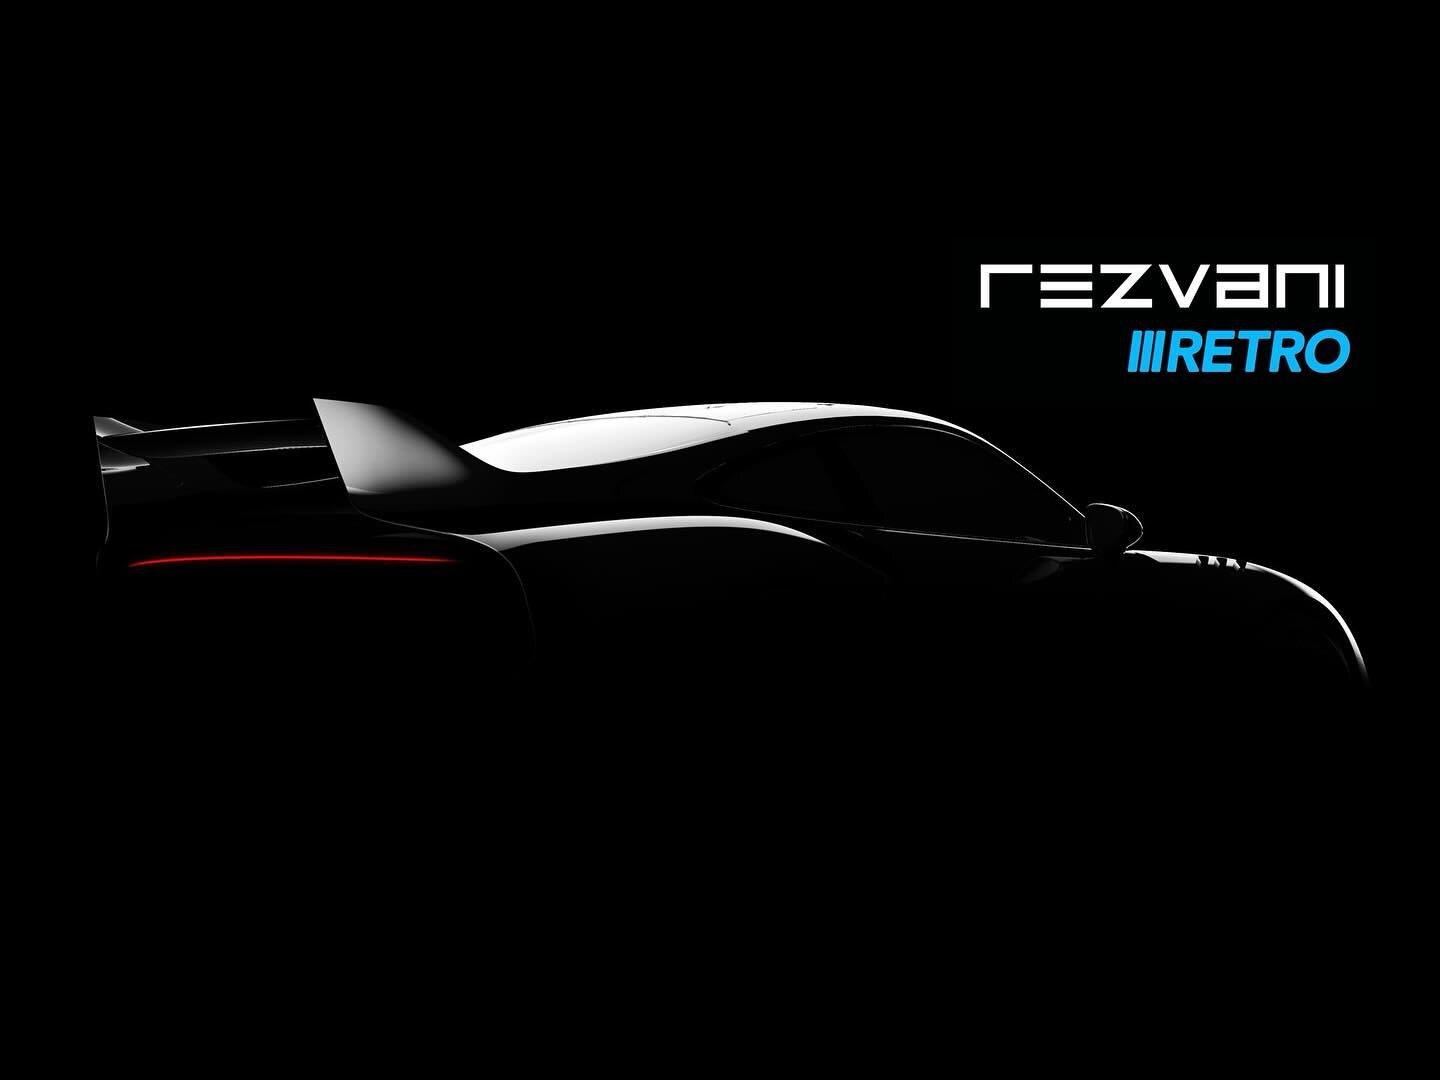 WHAT IF PAST MERGED WITH PRESENT?

In just a few weeks, Rezvani Motors will introduce a highly anticipated addition to its automotive lineup with the launch of a new sub-brand called Rezvani Retro. Rezvani Retro is a new design house dedicated to des